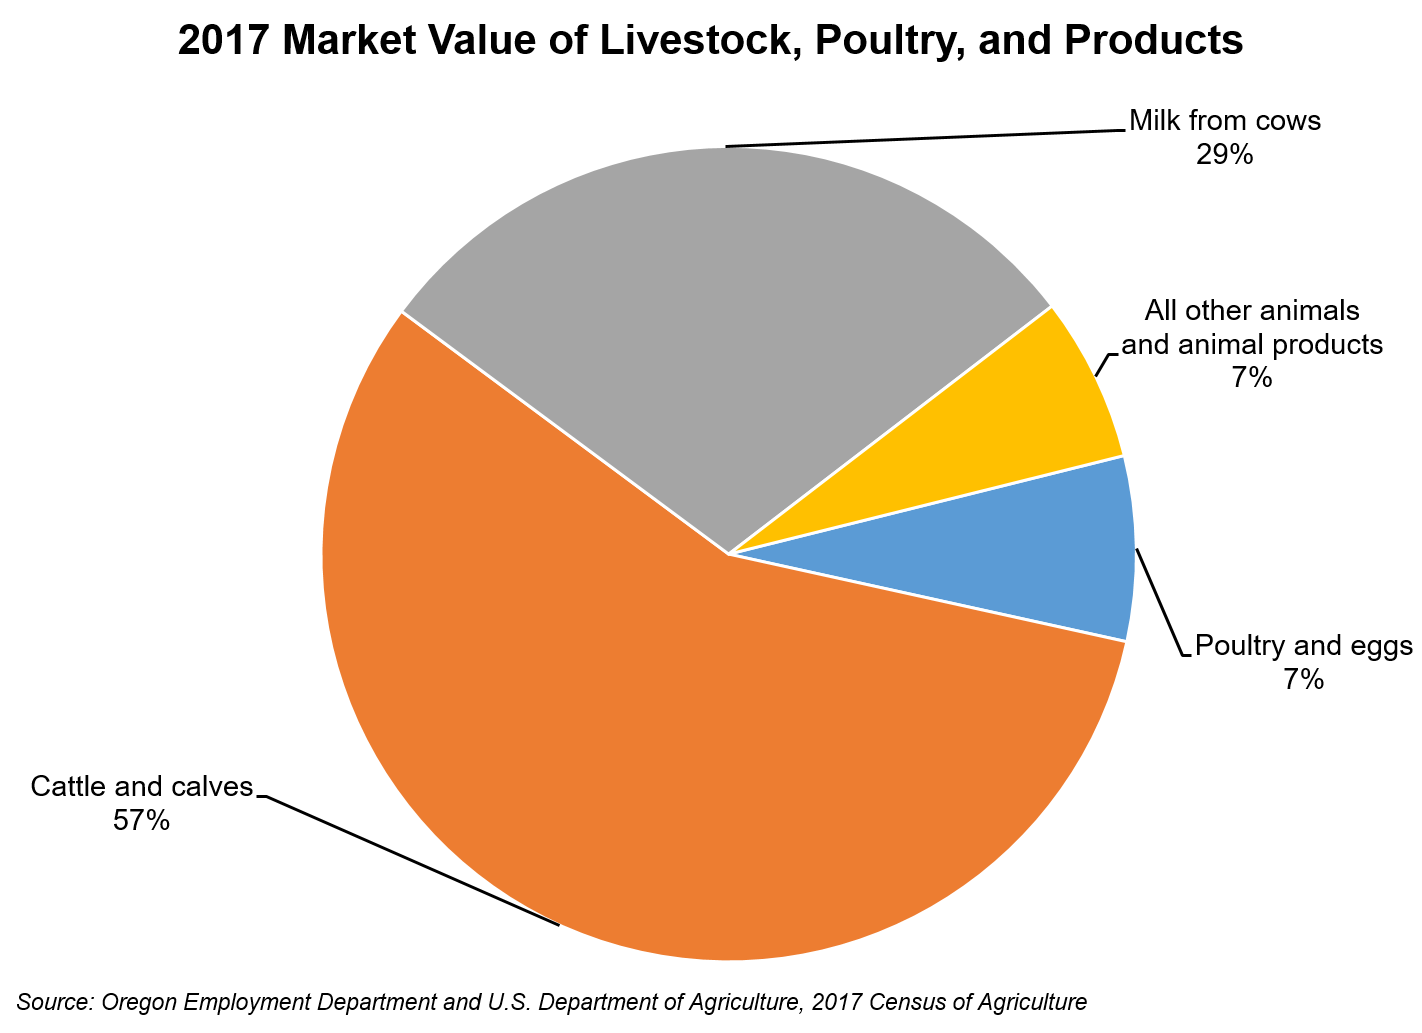 Graph showing 2017 market value of livestock, poultry, and products